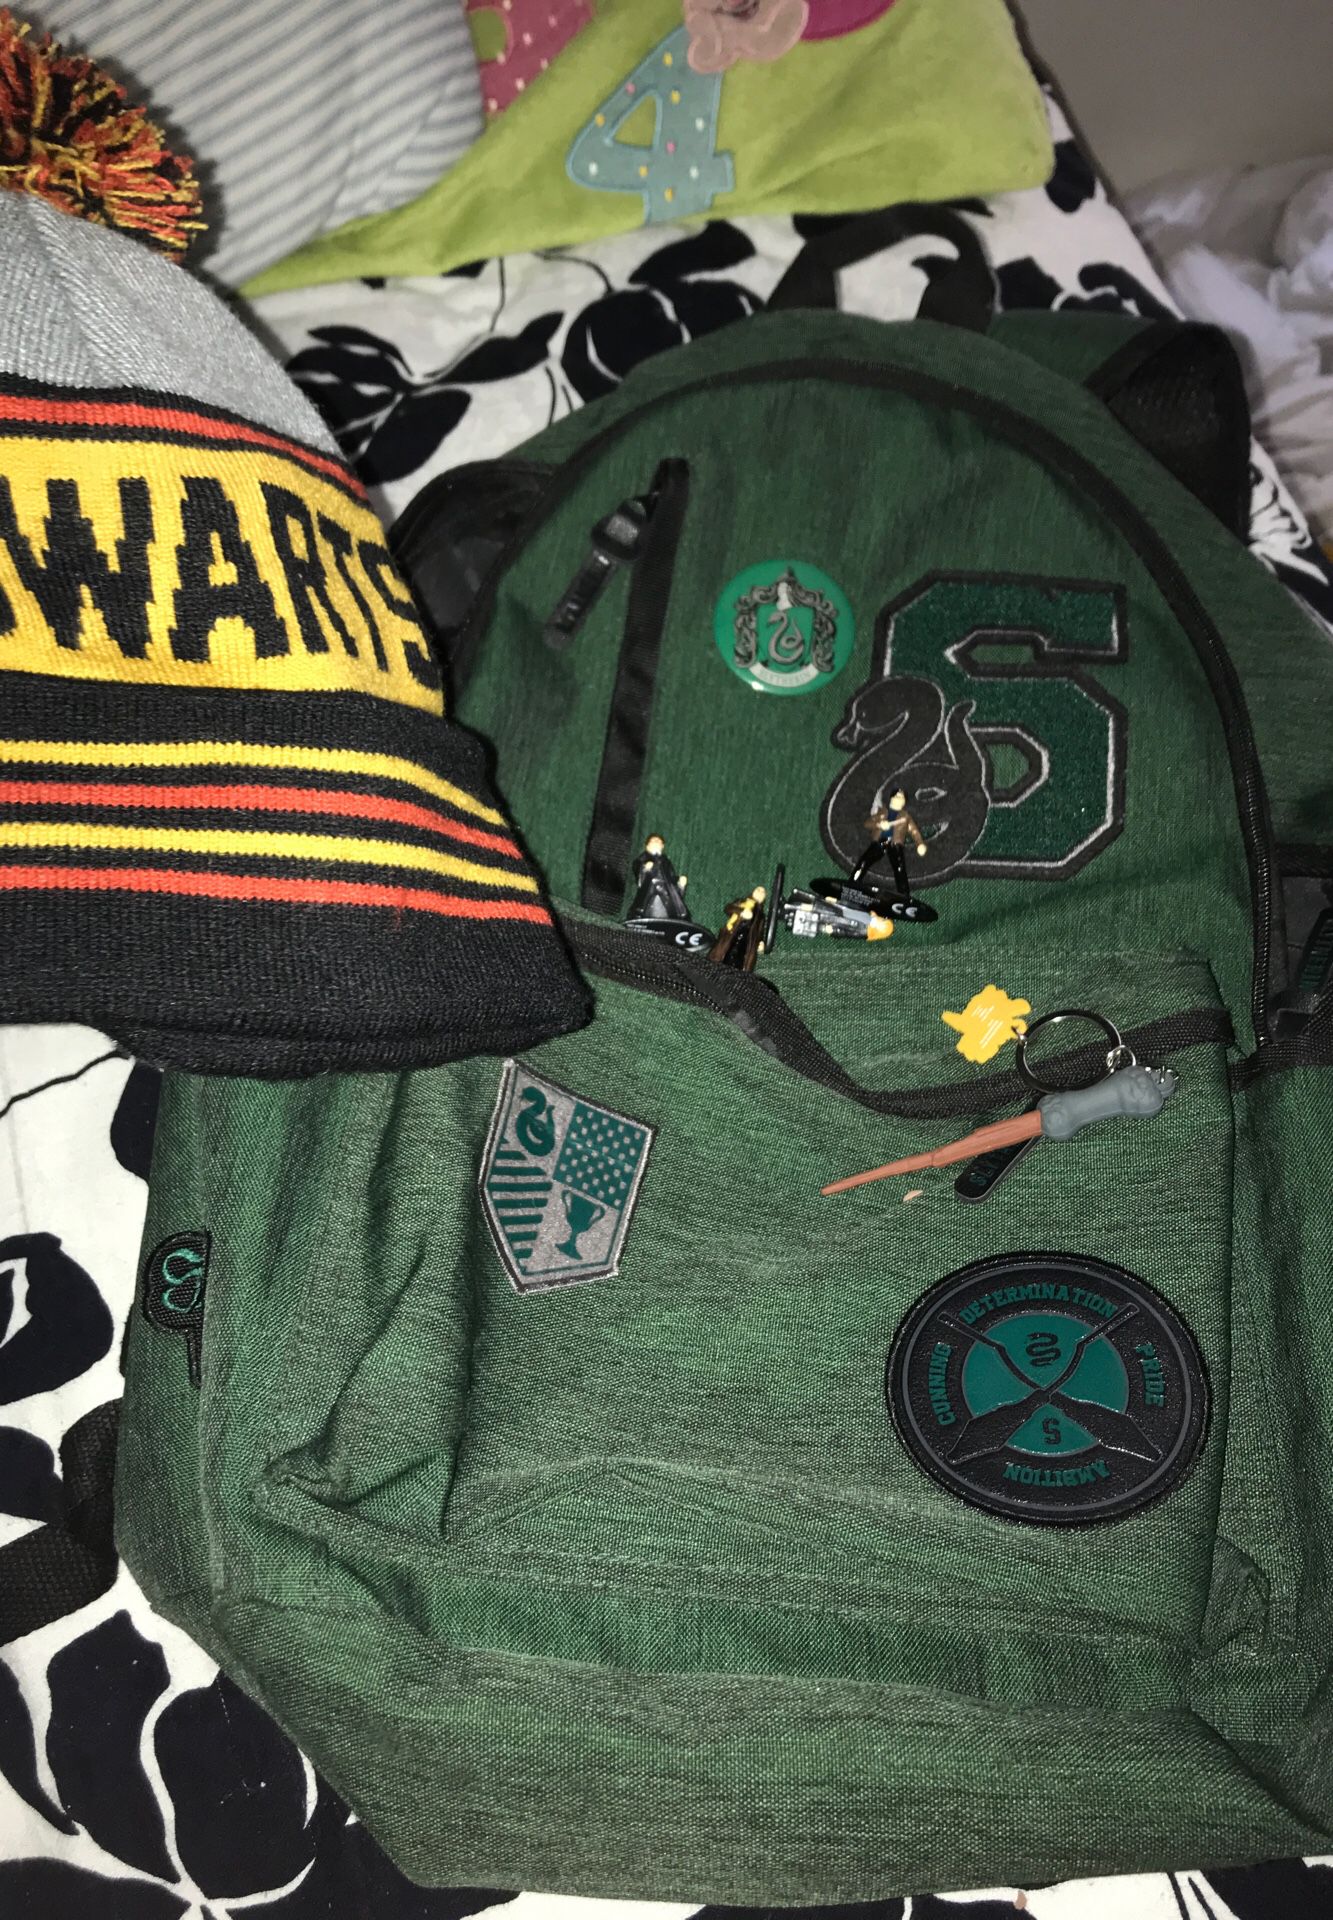 Slytherin Harry Potter back pack from the Harry Potter collectible site retail price 50 with hog warts hat and some Harry Potter toys